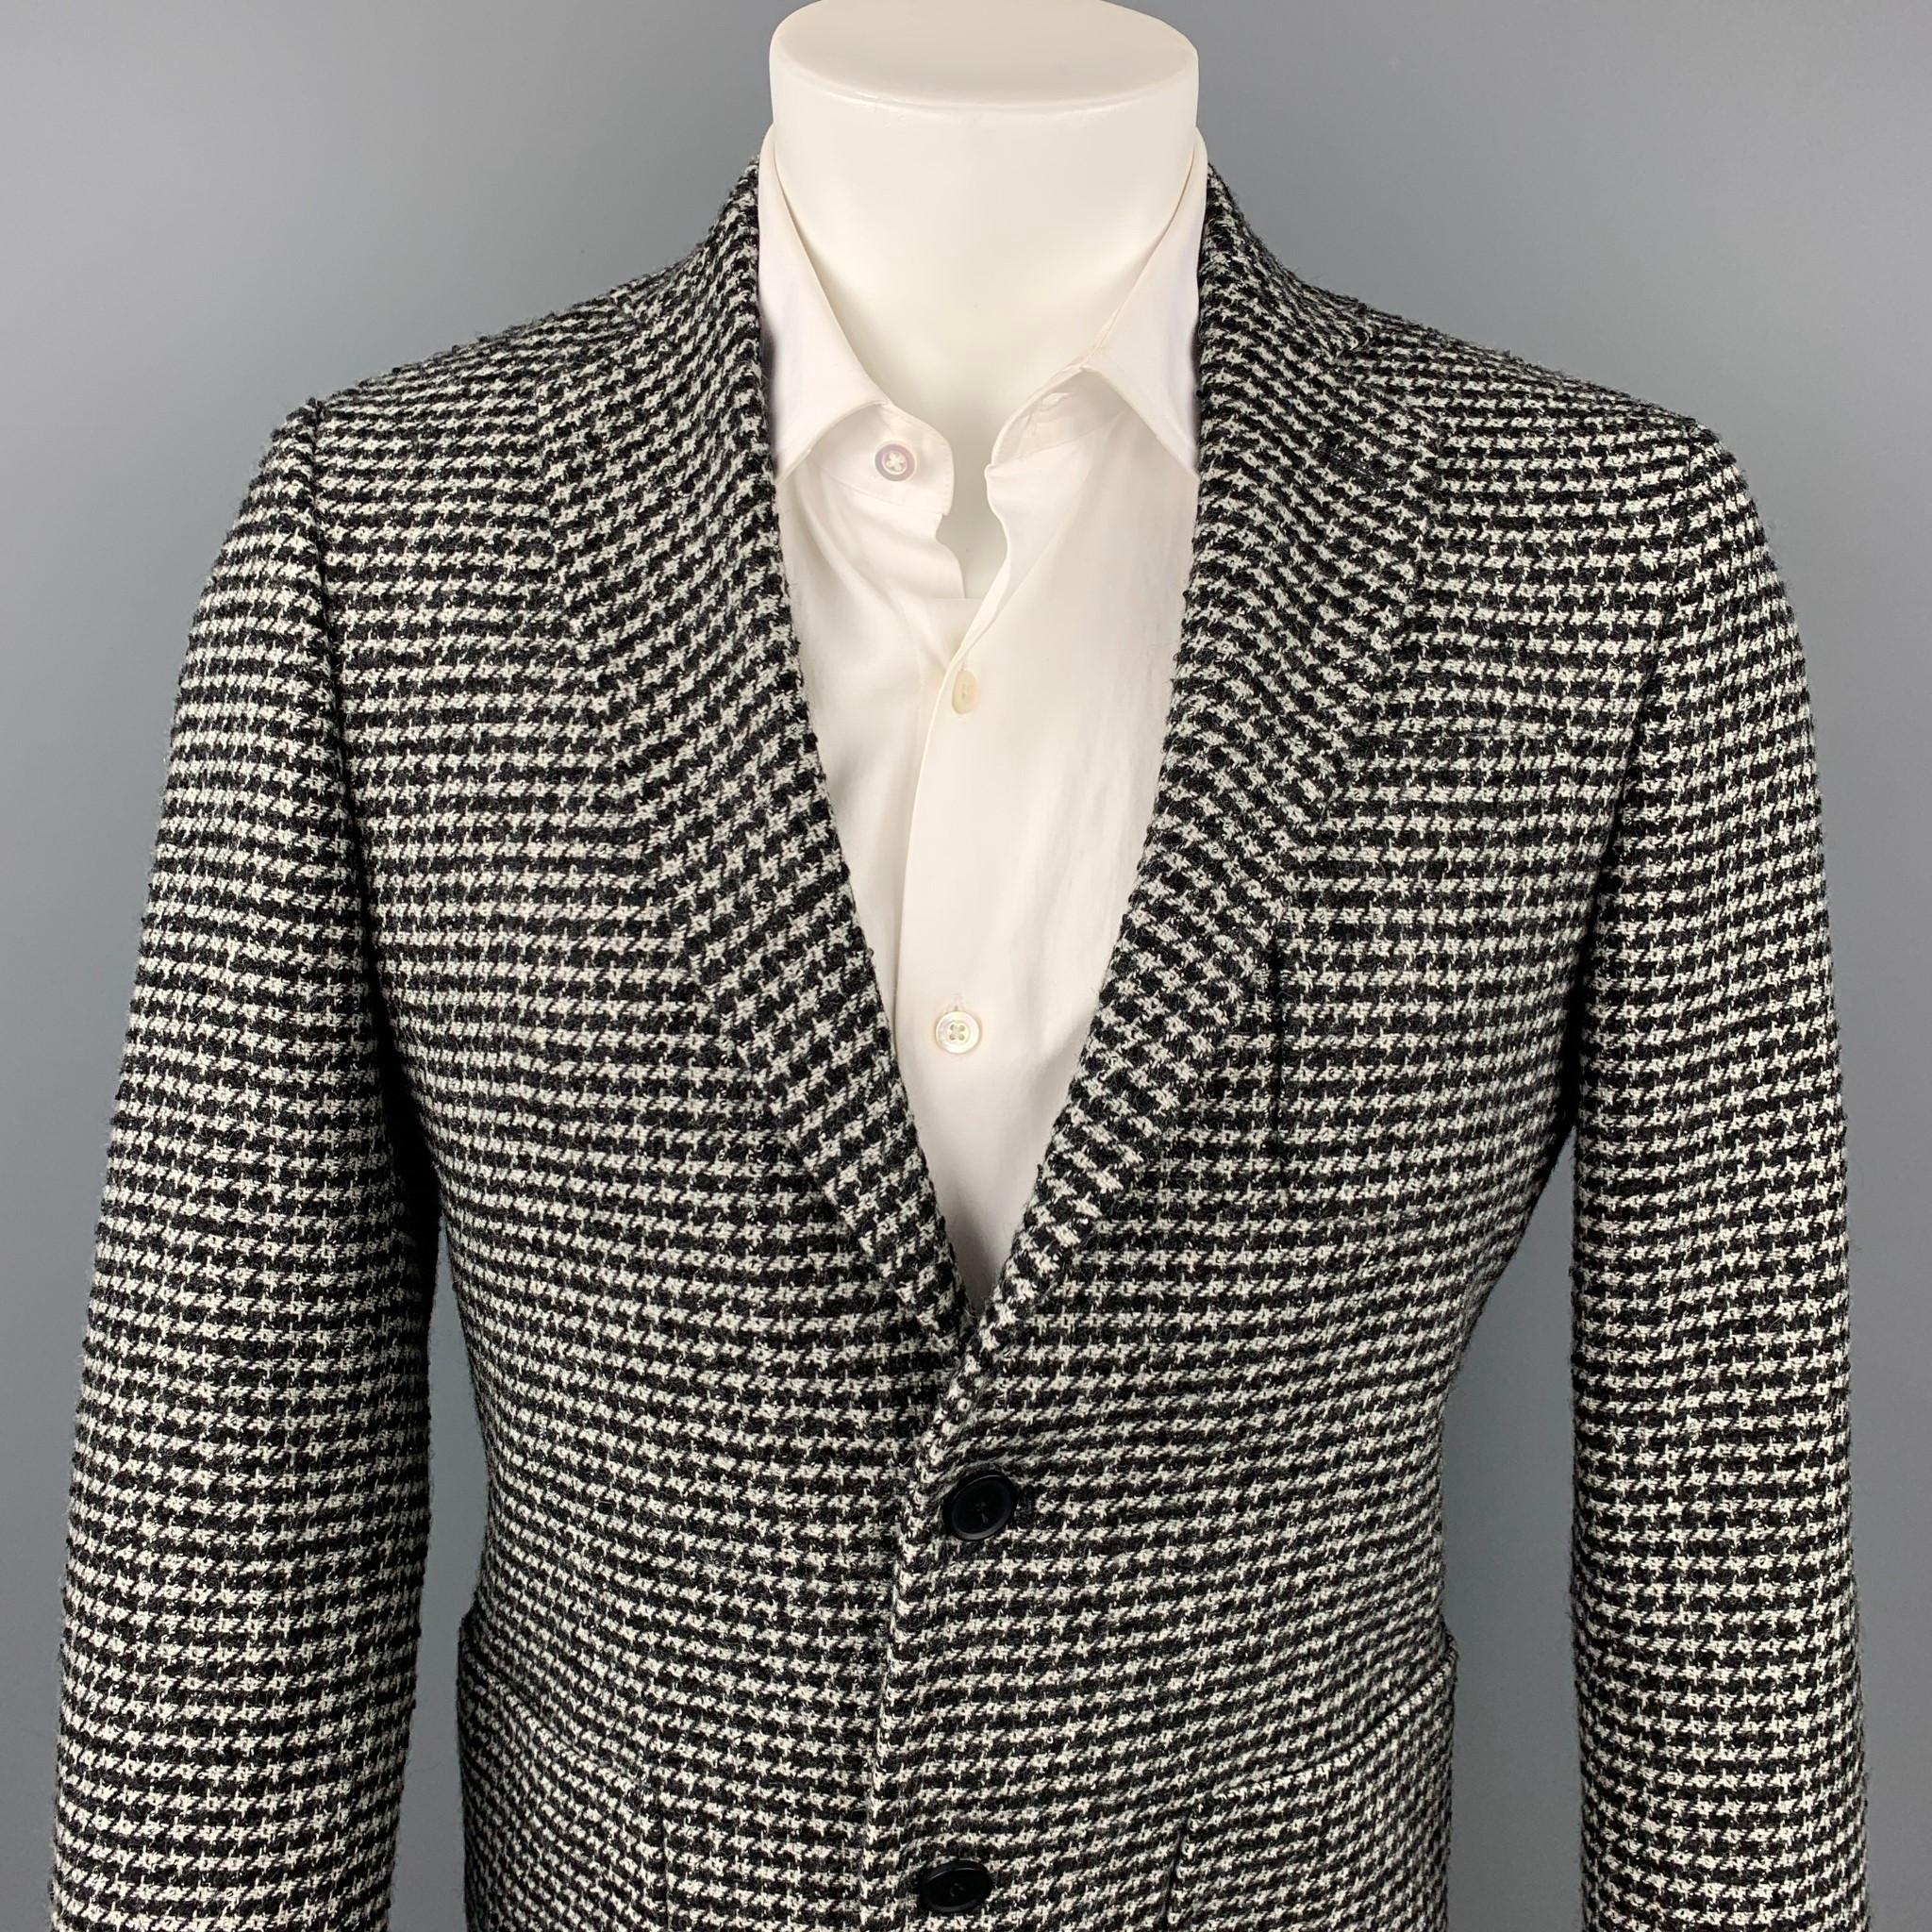 MICHAEL KORS sport coat comes in a black & grey houndstooth wool blend with a half liner featuring a notch lapel, patch pockets, and a two button closure. 

Very Good Pre-Owned Condition.
Marked: 36 / 46 R

Measurements:

Shoulder: 17 in.
Chest: 40